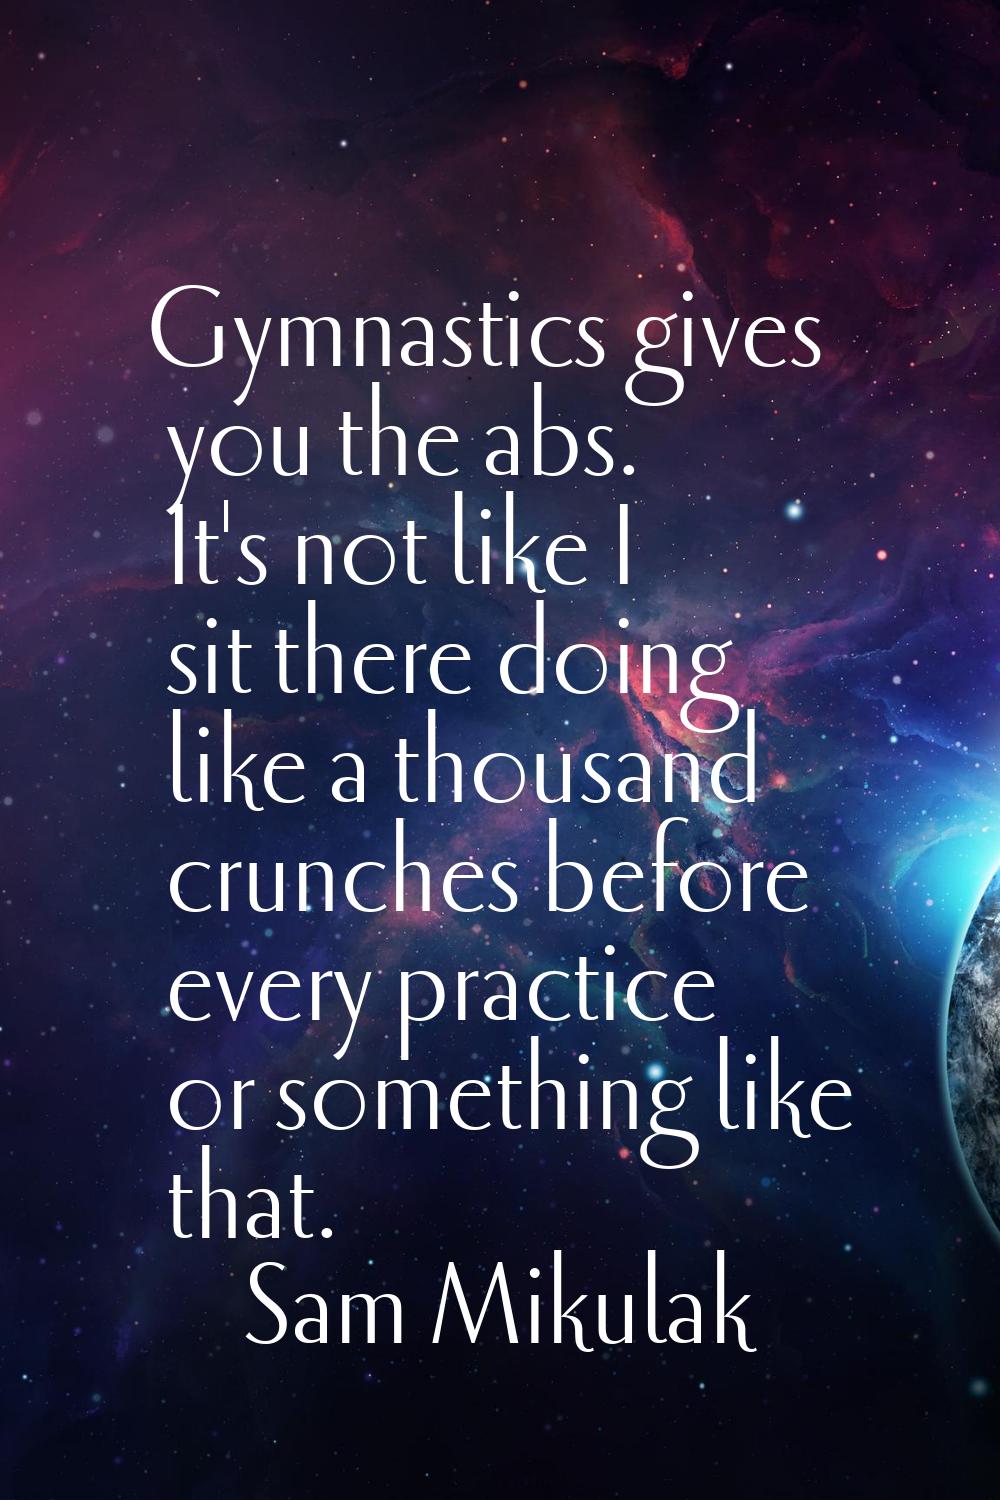 Gymnastics gives you the abs. It's not like I sit there doing like a thousand crunches before every